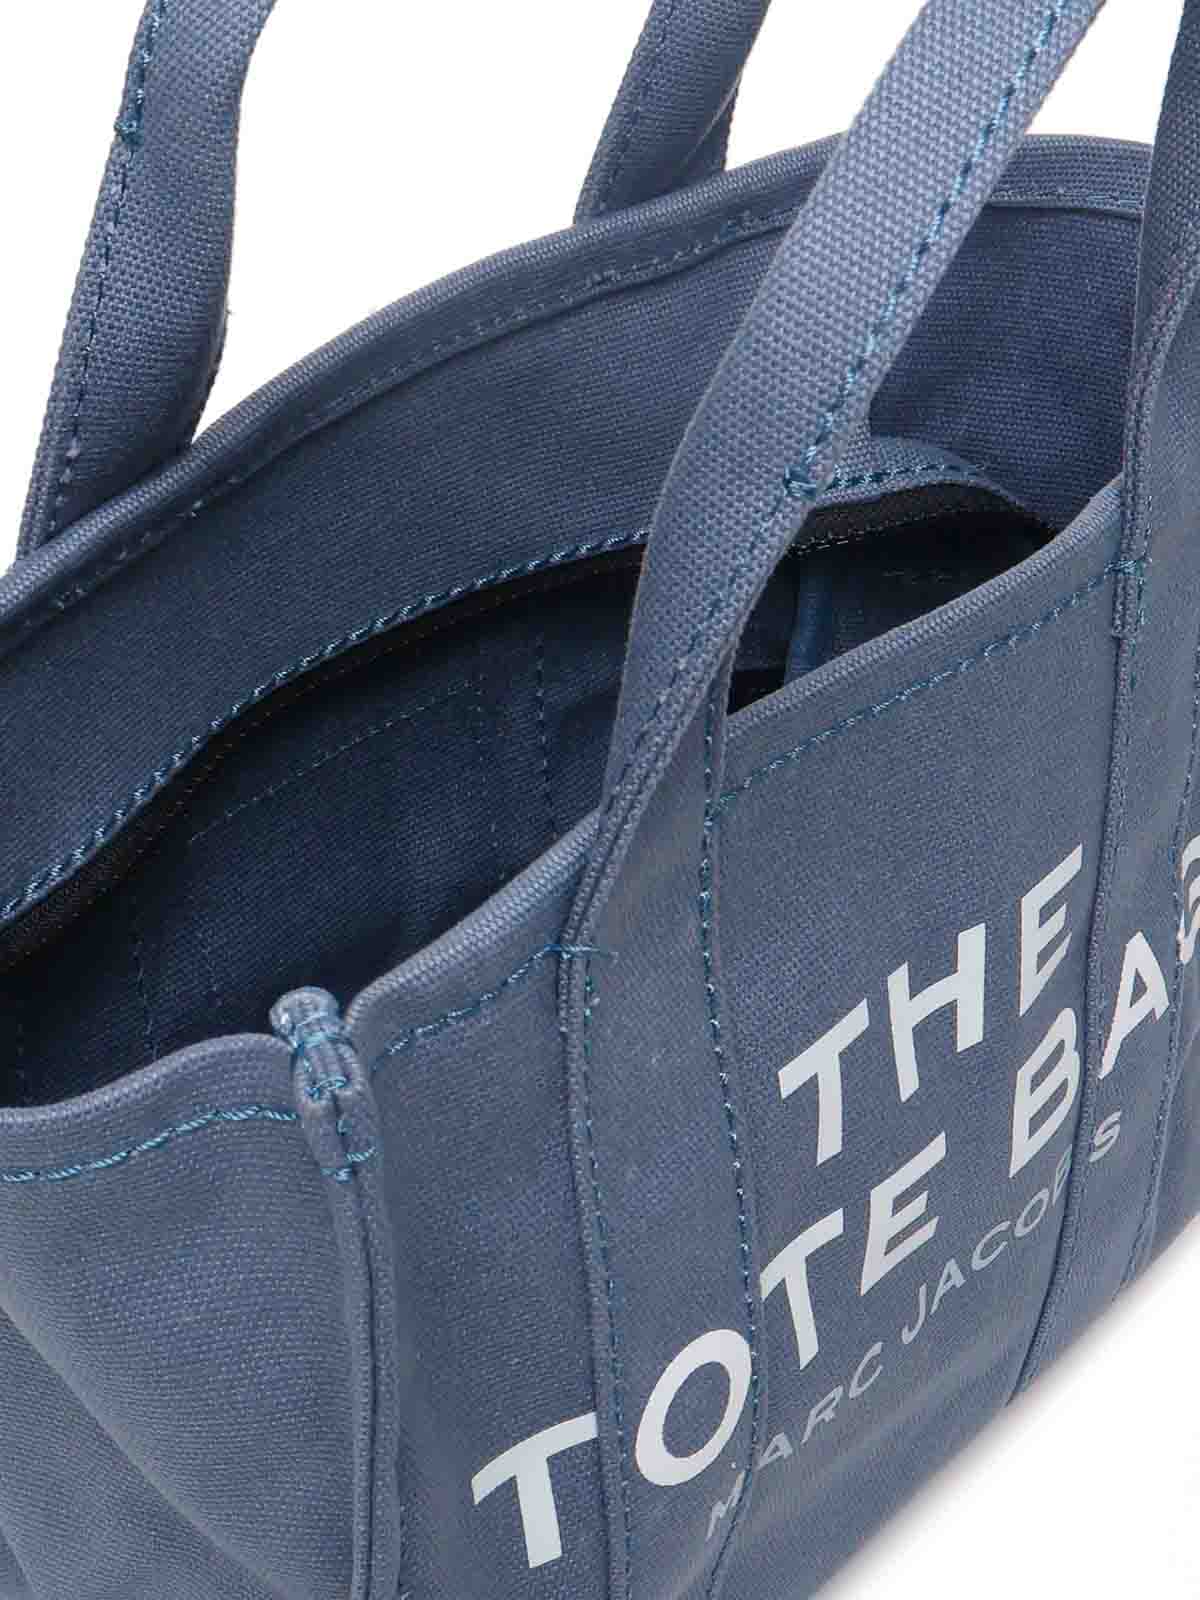 Shop Marc Jacobs Small Tote Bag In Blue